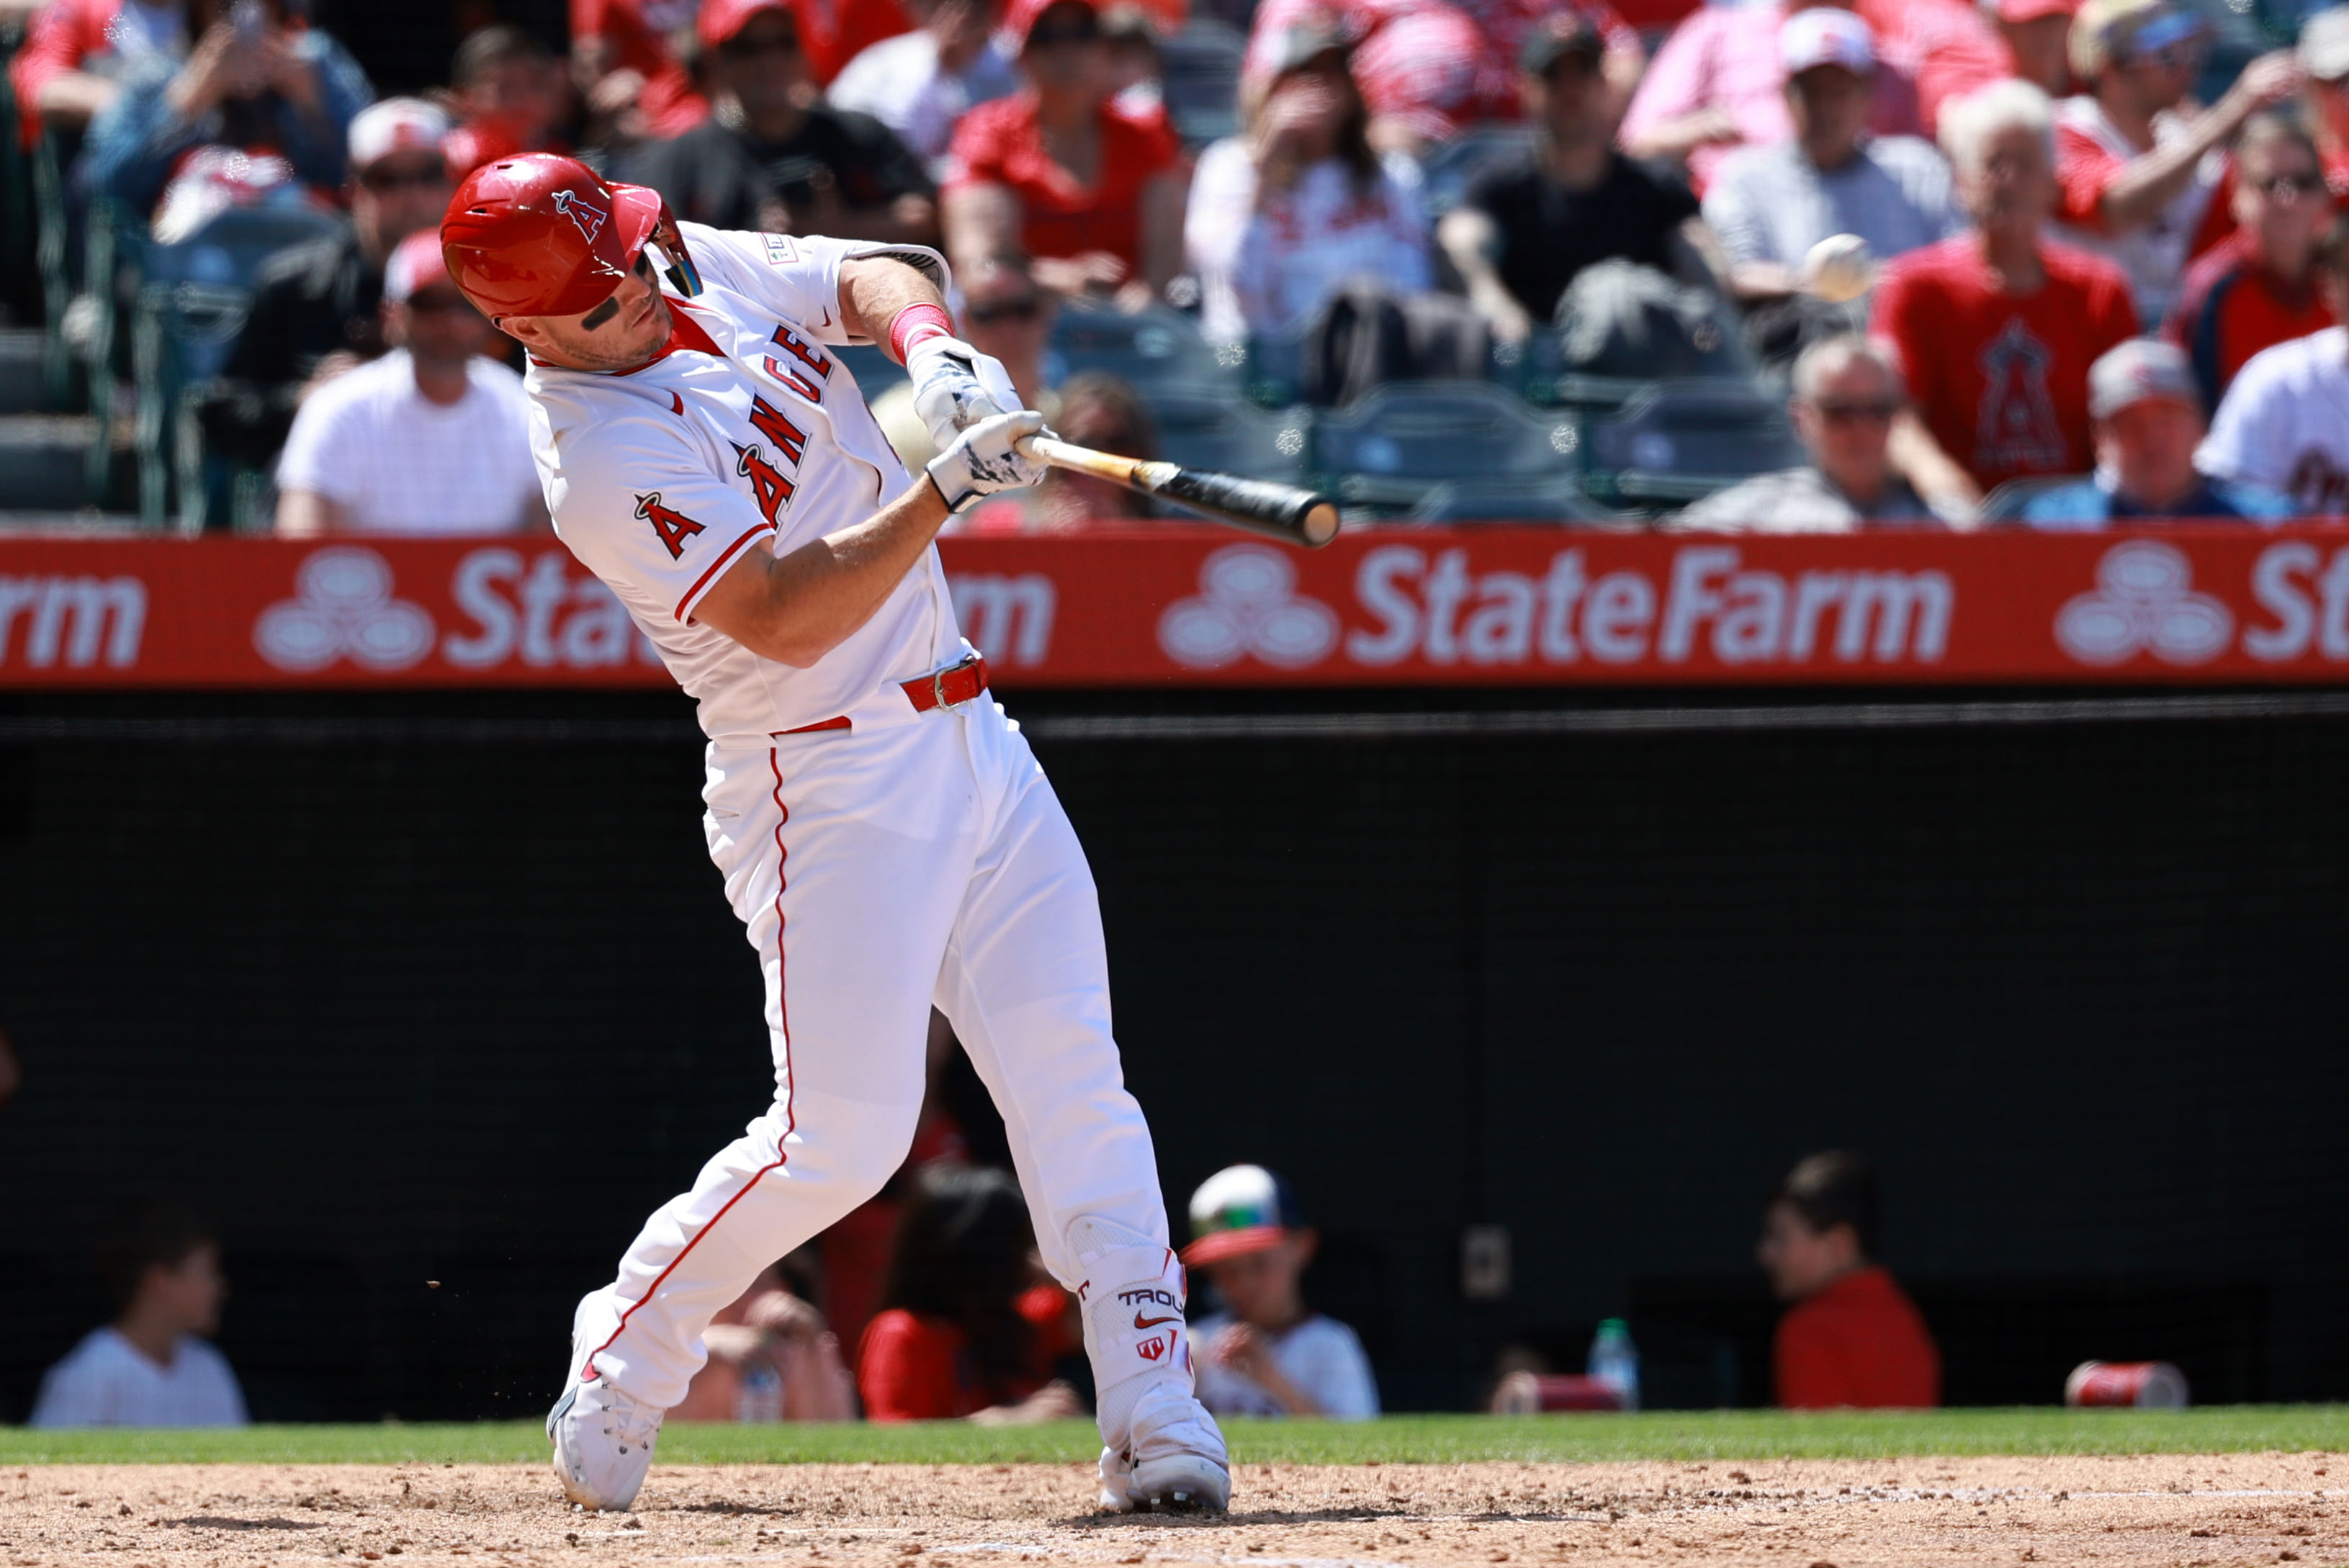 Los Angeles Angels - Mike Trout (Image via USA Today)